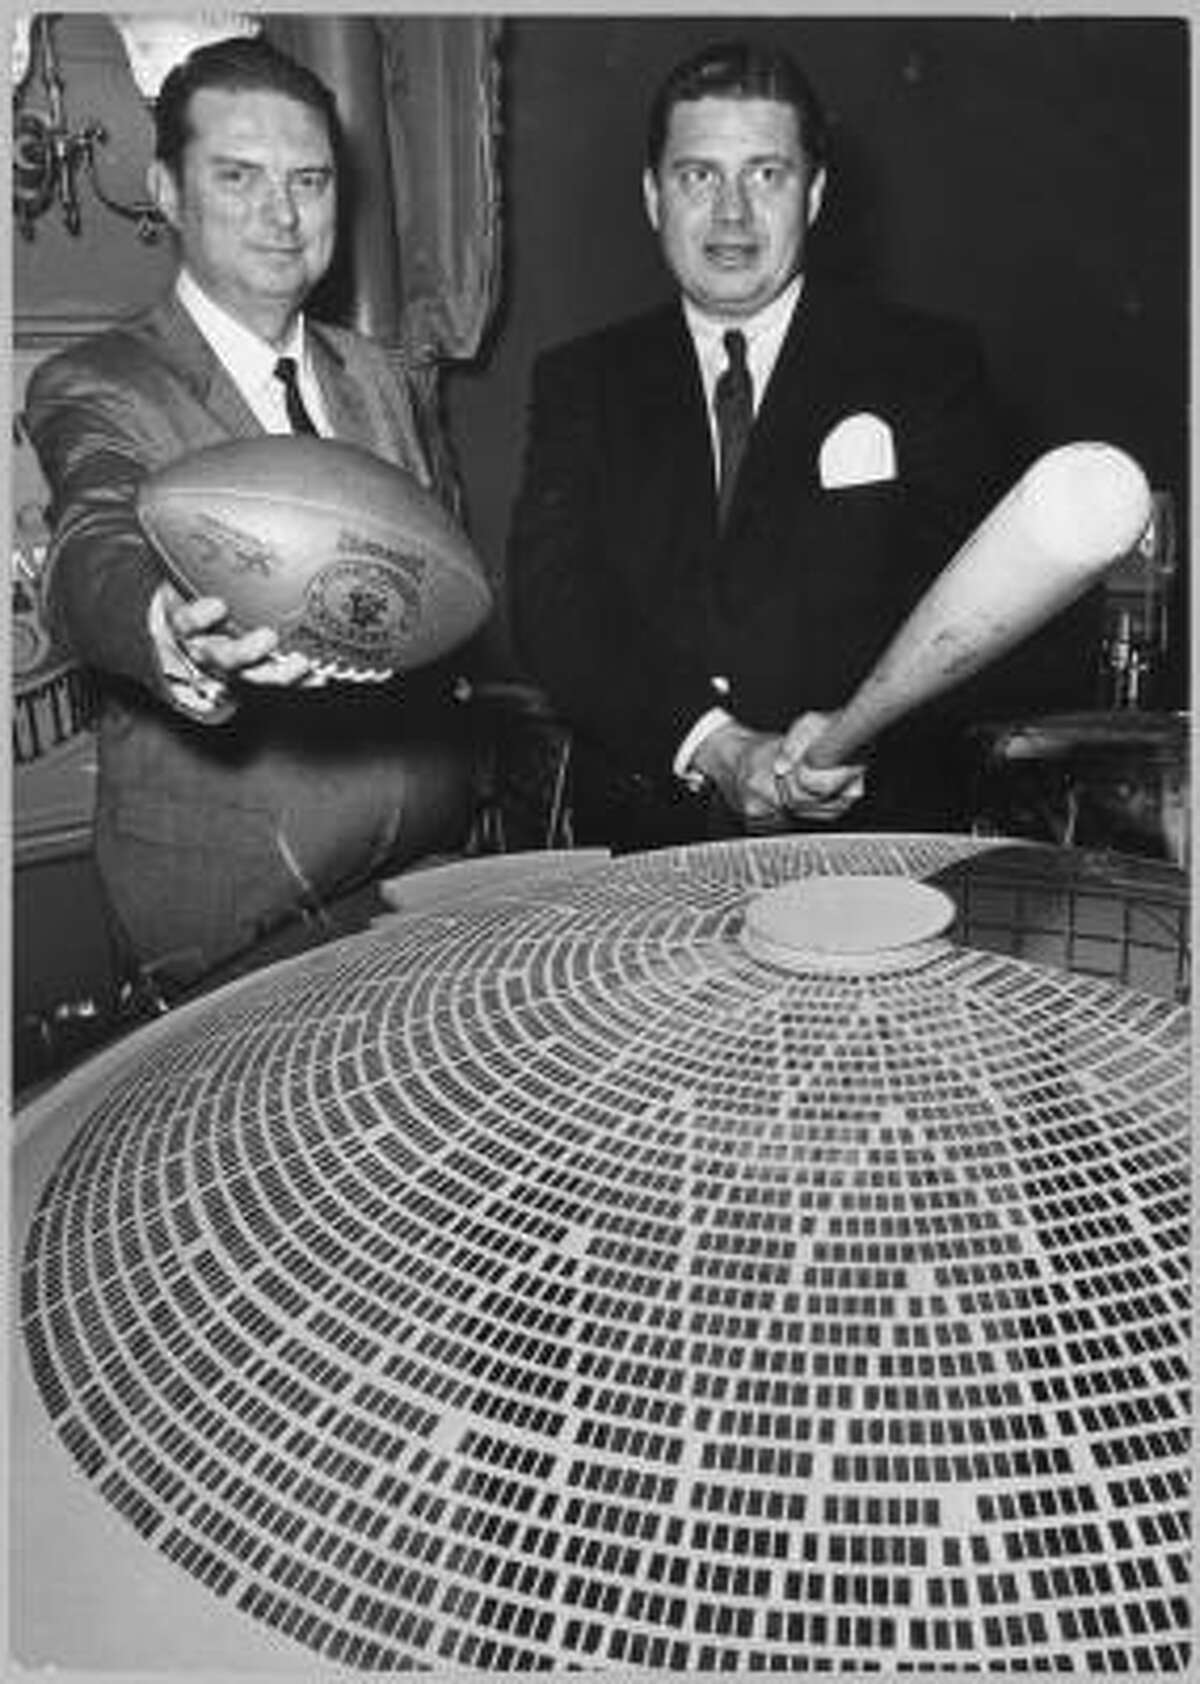 In 1961, Bud Adams, right, owner of the Oilers, poses with Roy Hofheinz, president of the Colt .45s, as they make a pitch to voters for building the proposed domed stadium. At the time, Adams said the stadium would assure the continuance of professional football and baseball in Houston.